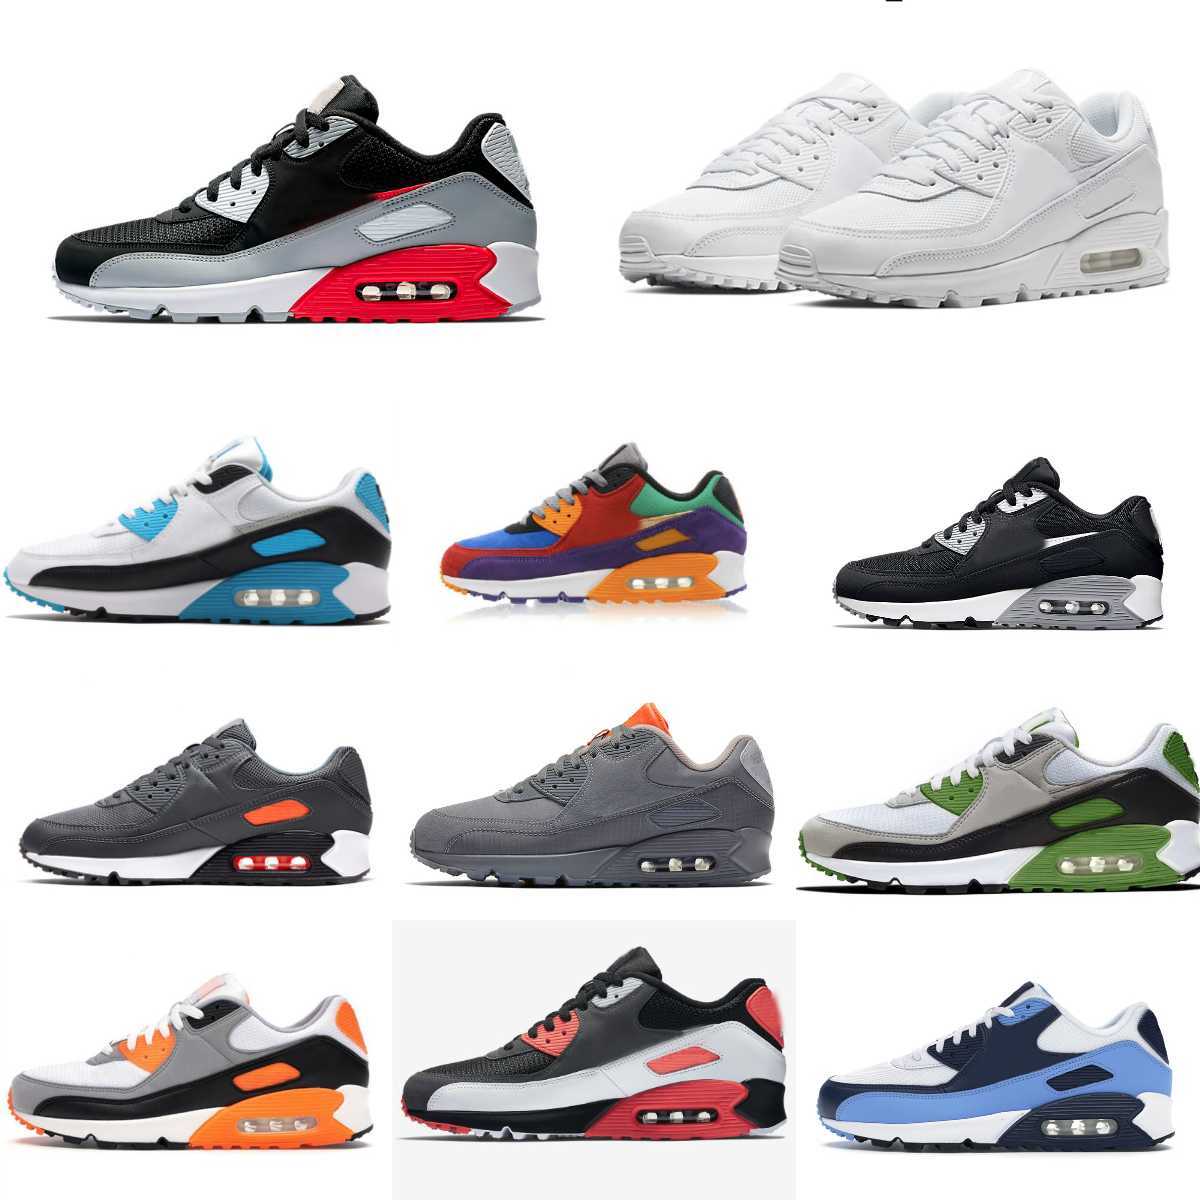 

Trainers Mens 90 Running Sports Shoes Triple White Black Red Maxs OG 90s Wolf Grey Polka Dot Infrared Total Orange Laser Blue Airs Hyper Grape Royal Women Sneakers S18, Please contact us